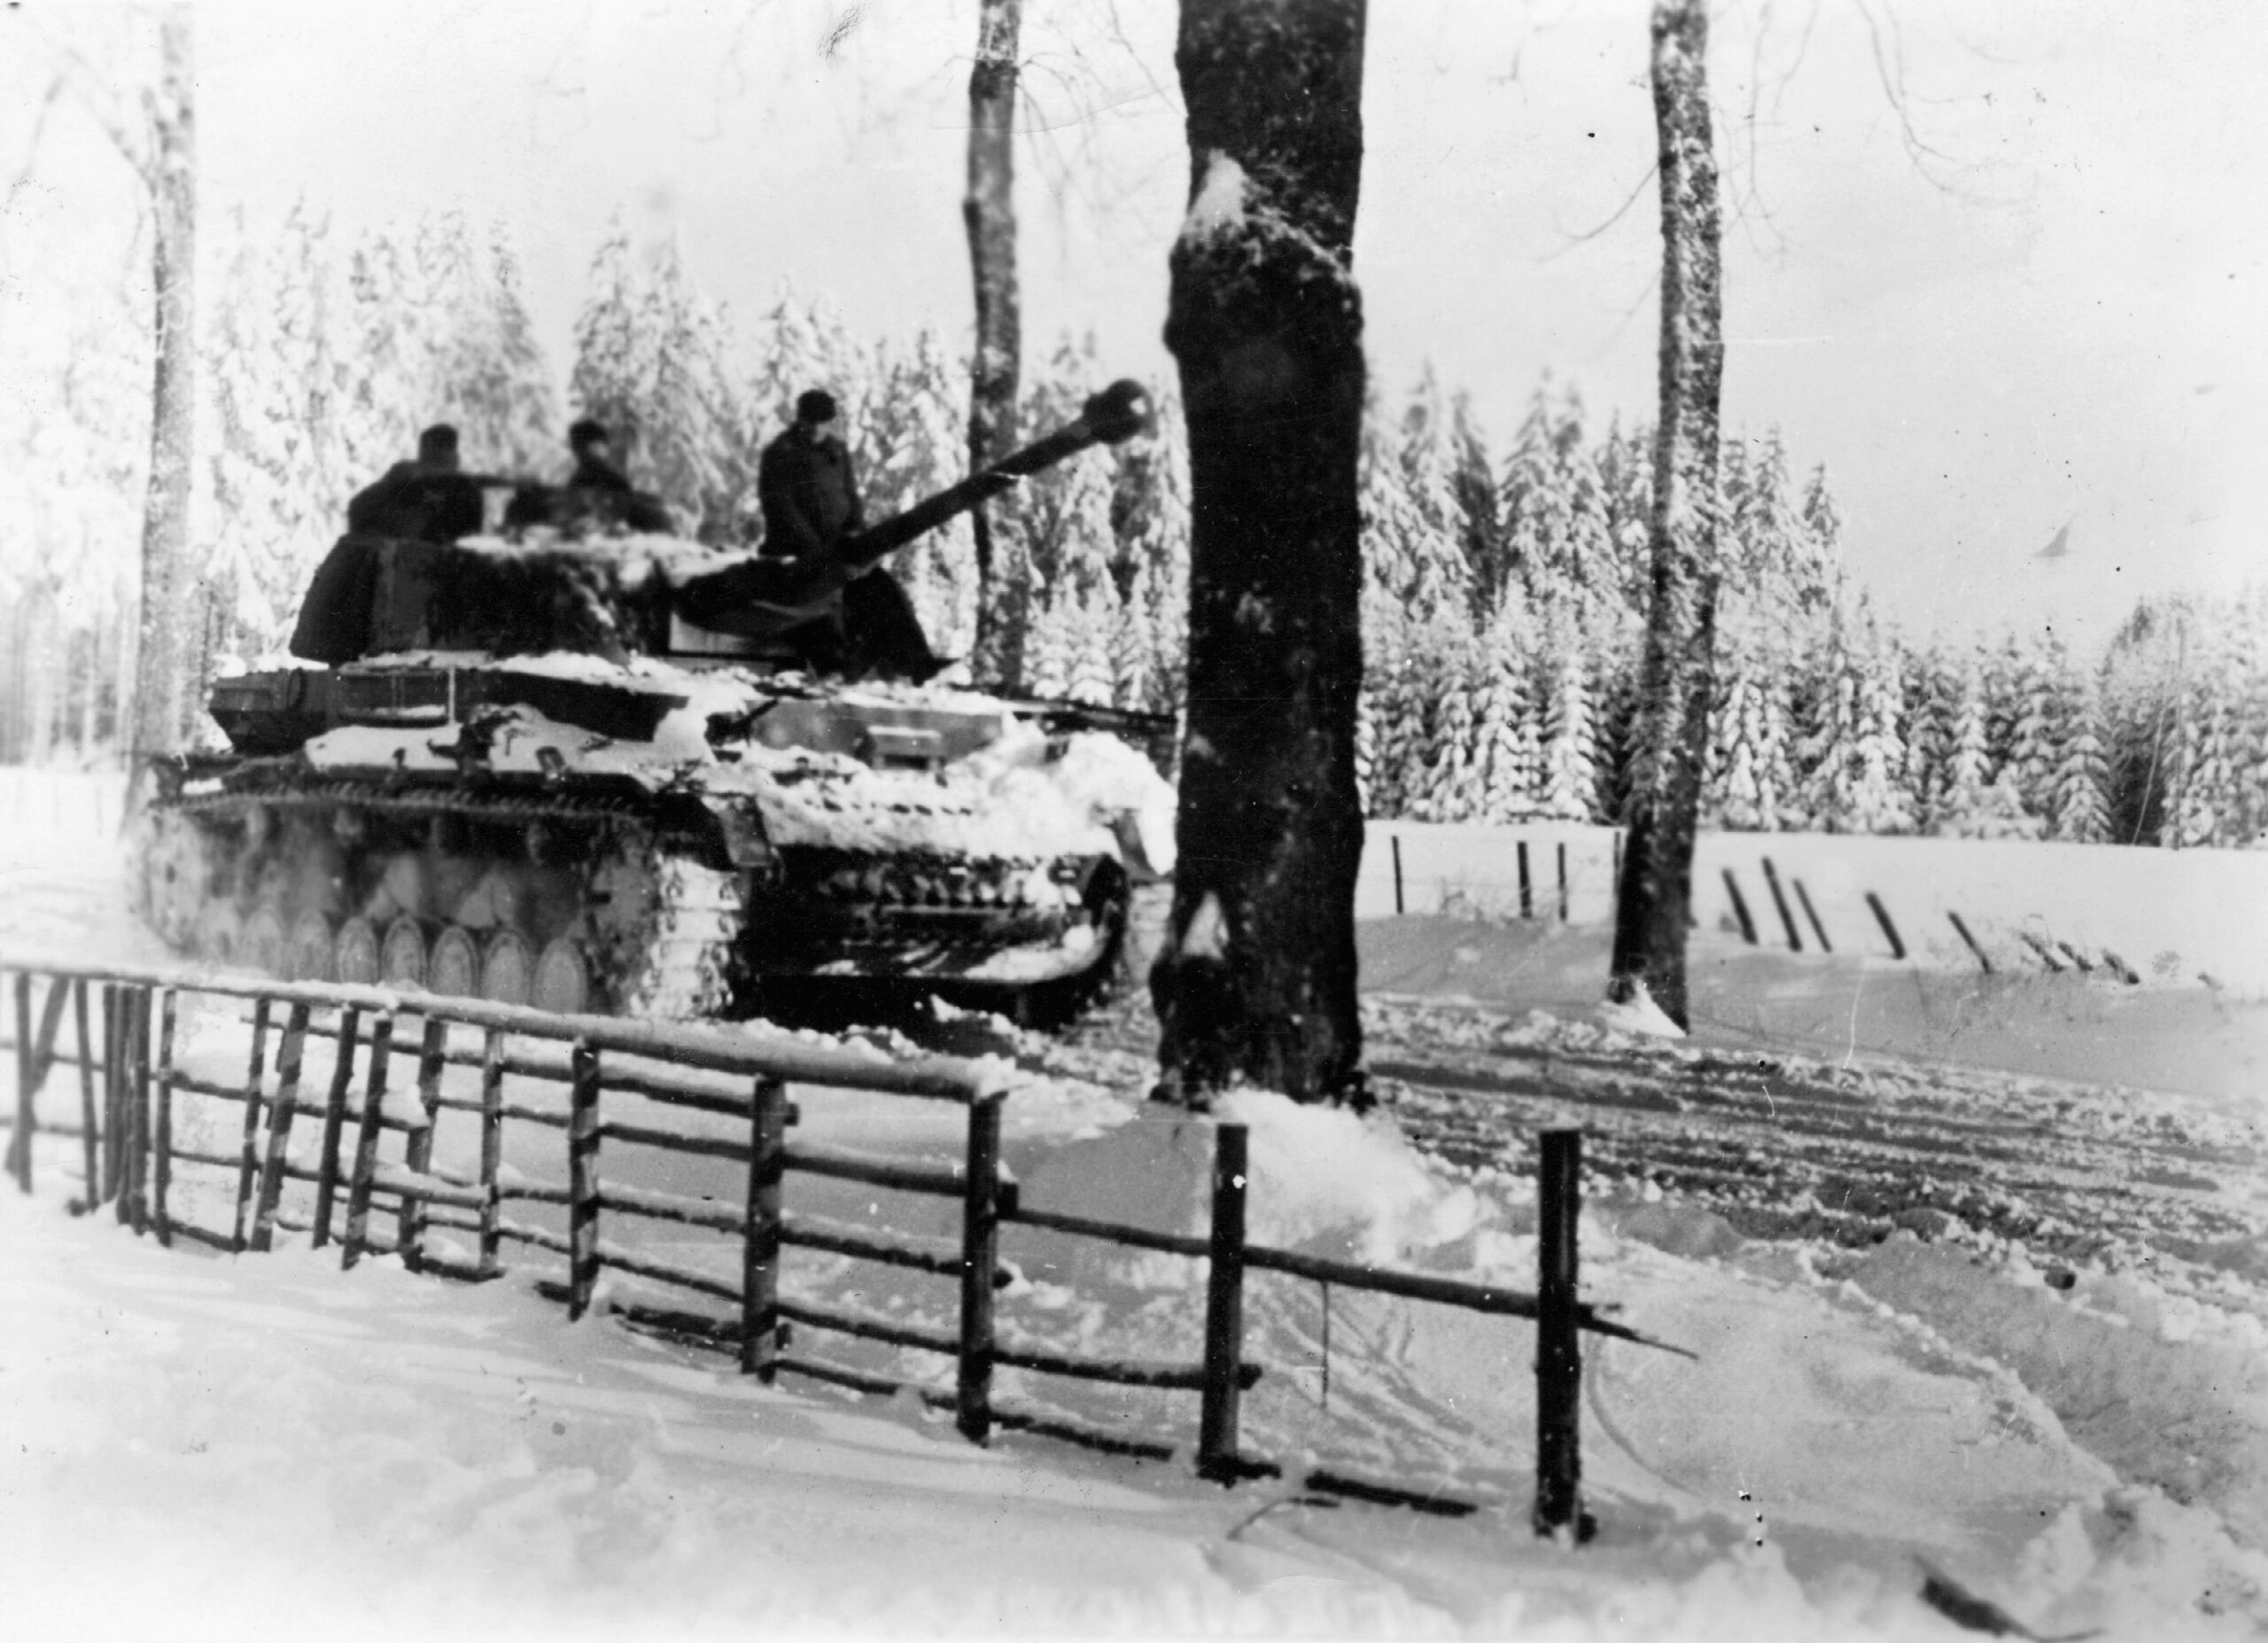 A Waffen-SS Panzer IV tank rolls forward along a snow-covered road during the Battle of the Bulge.  By January 1945, the last desperate German offensive in the West had lost its momentum.